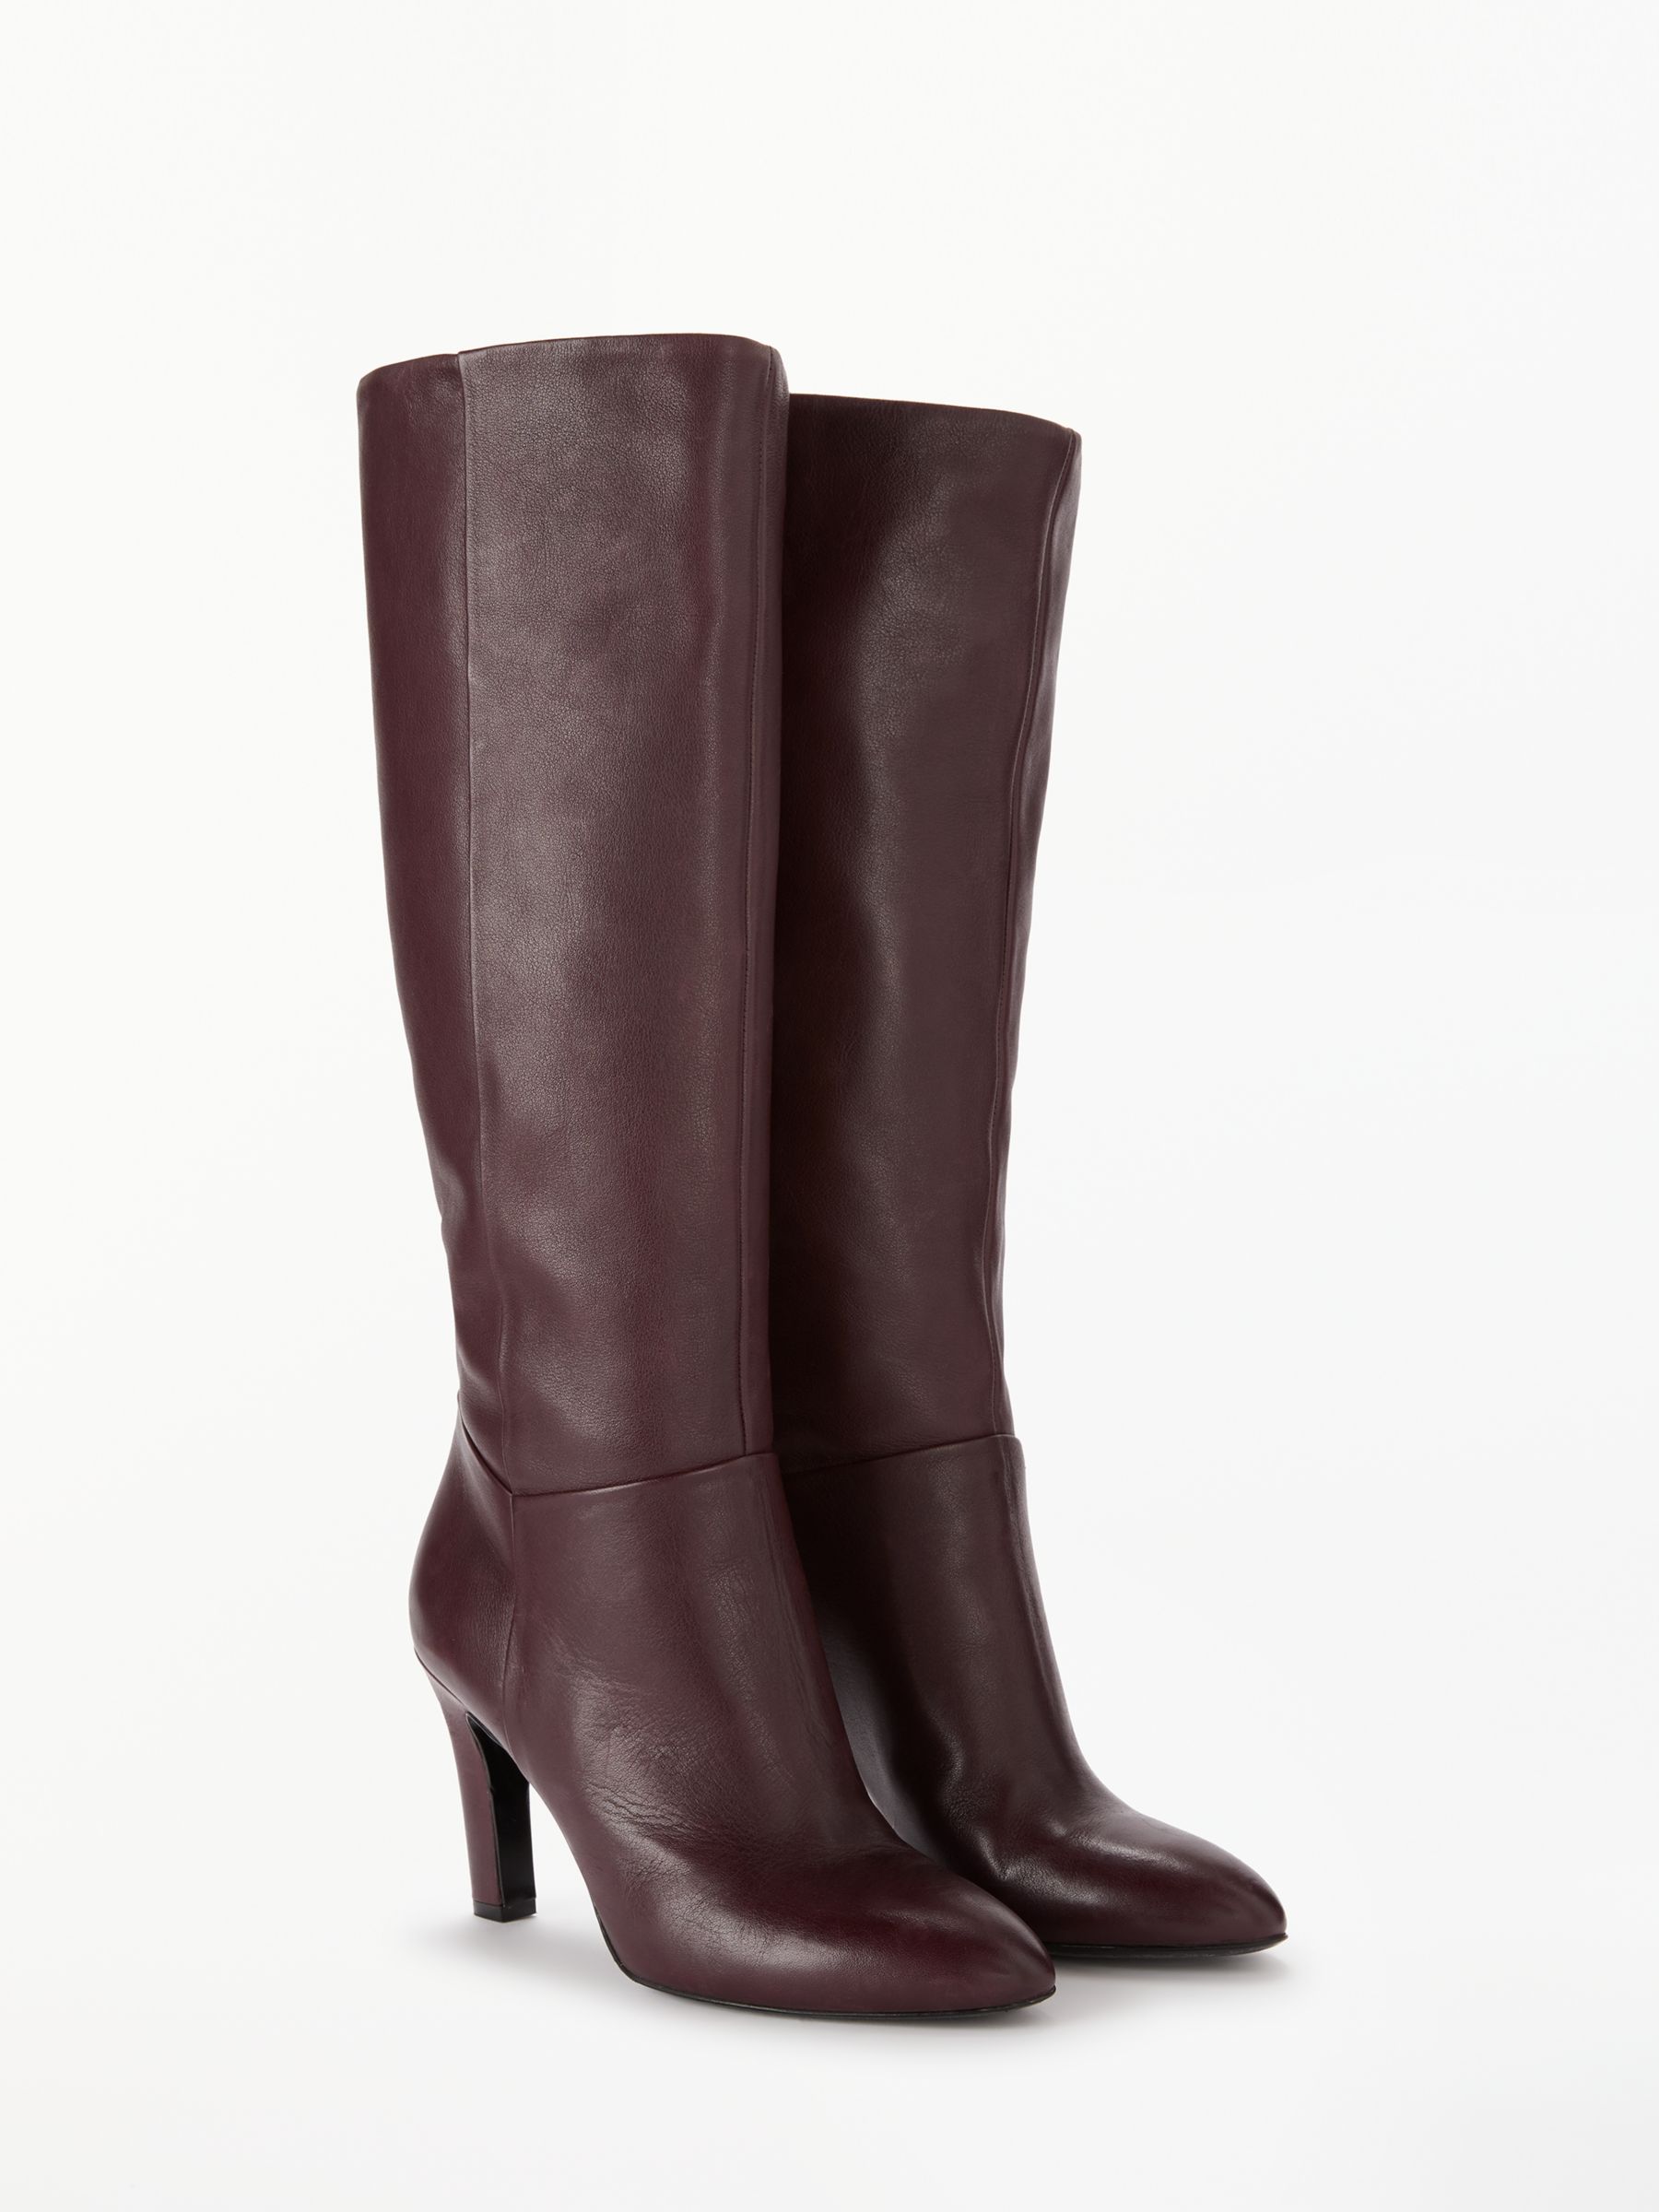 Partners Sienna Knee High Slouch Boots 